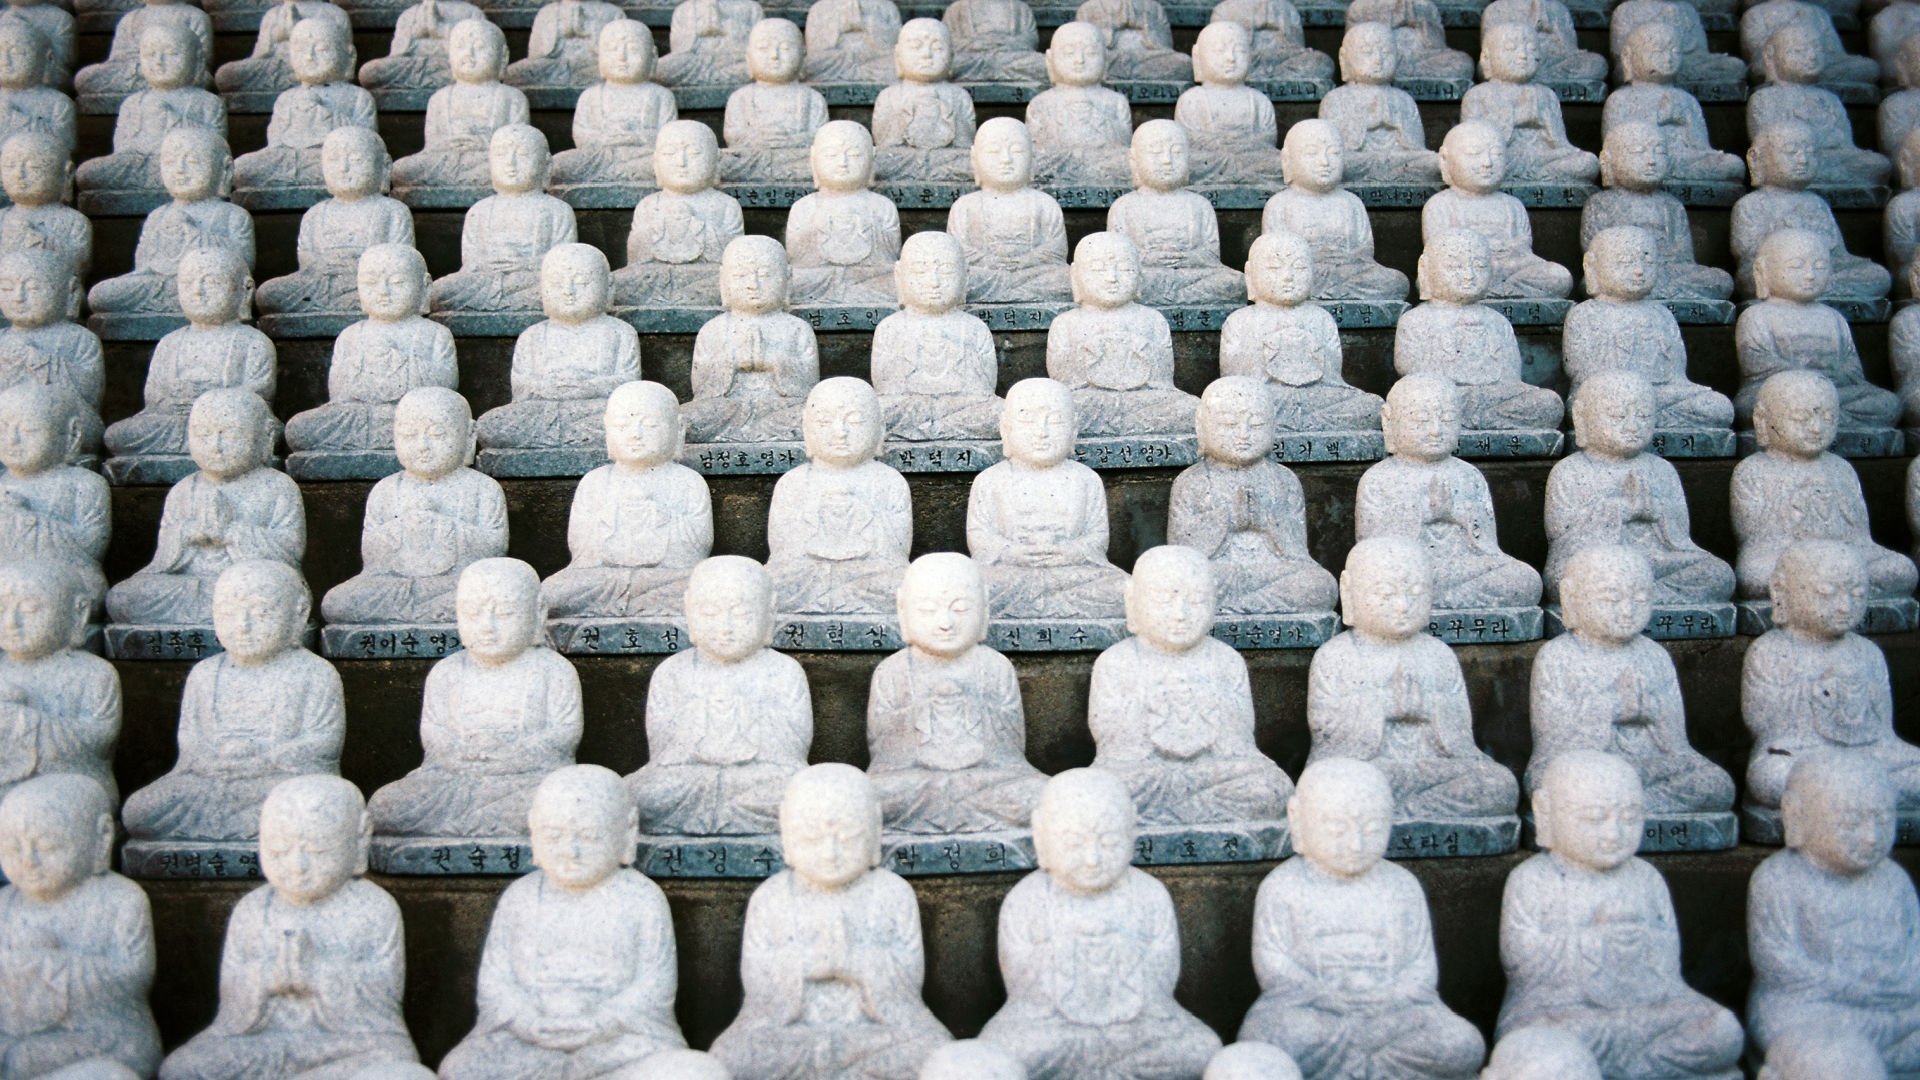 Over 50 identical Buddha statues placed in neat rows